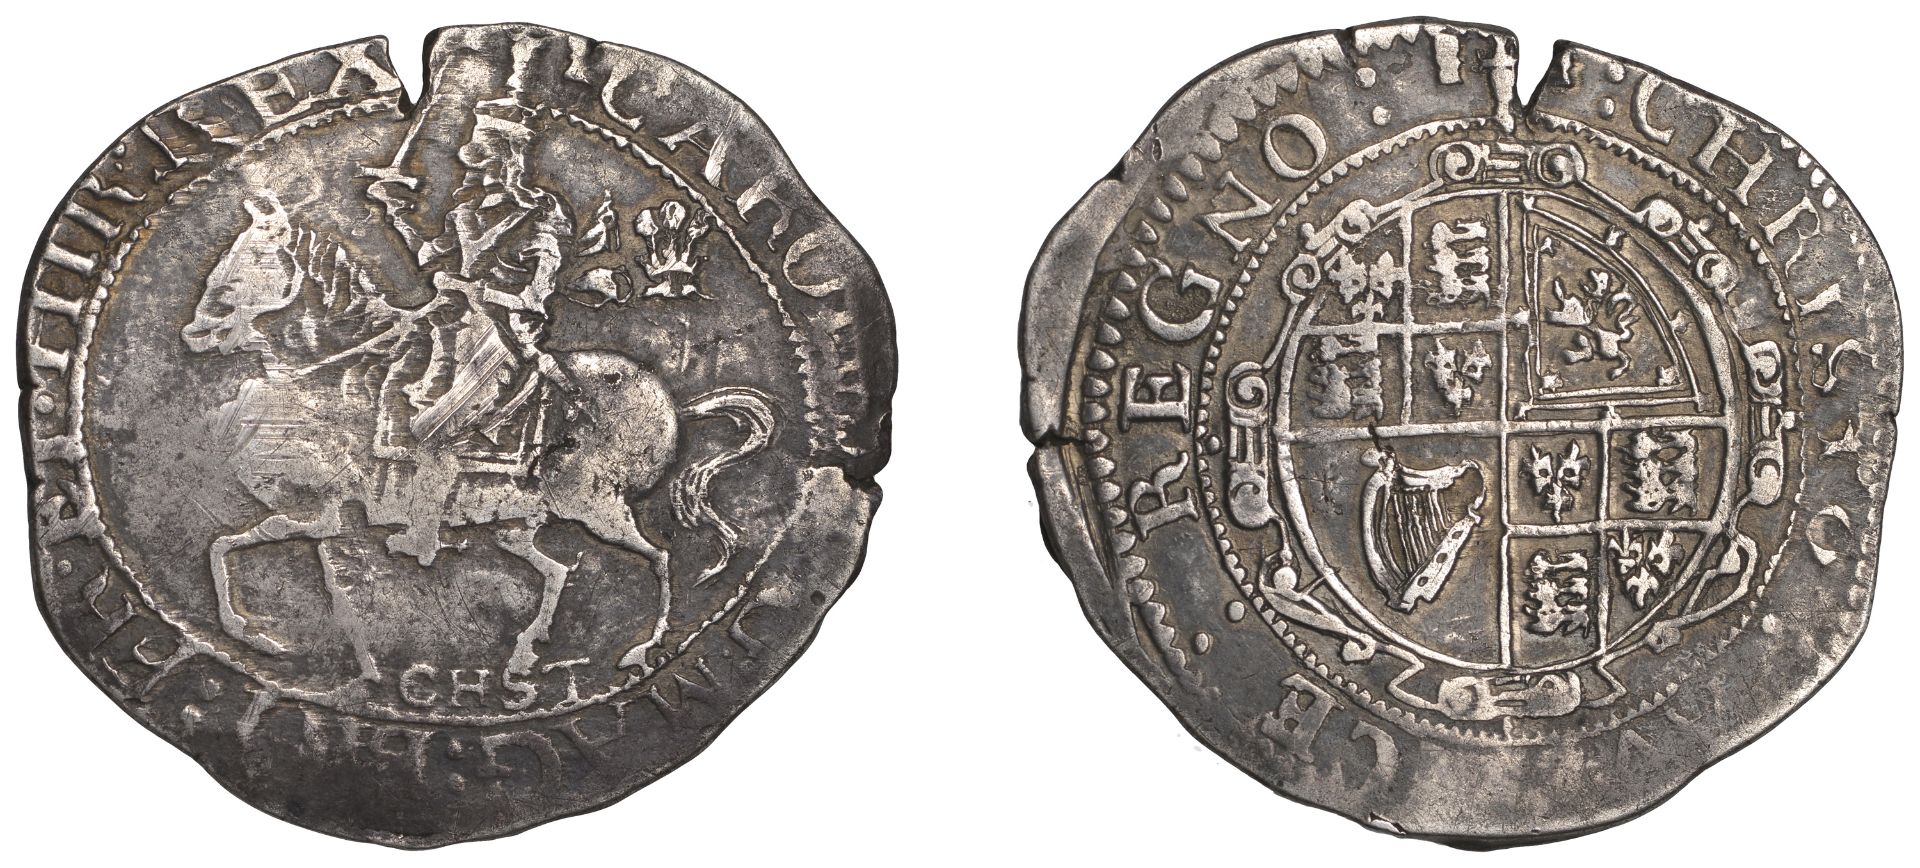 Charles I (1625-1649), Chester mint, Halfcrown, mm. three gerbs and sword, plume in right fi...